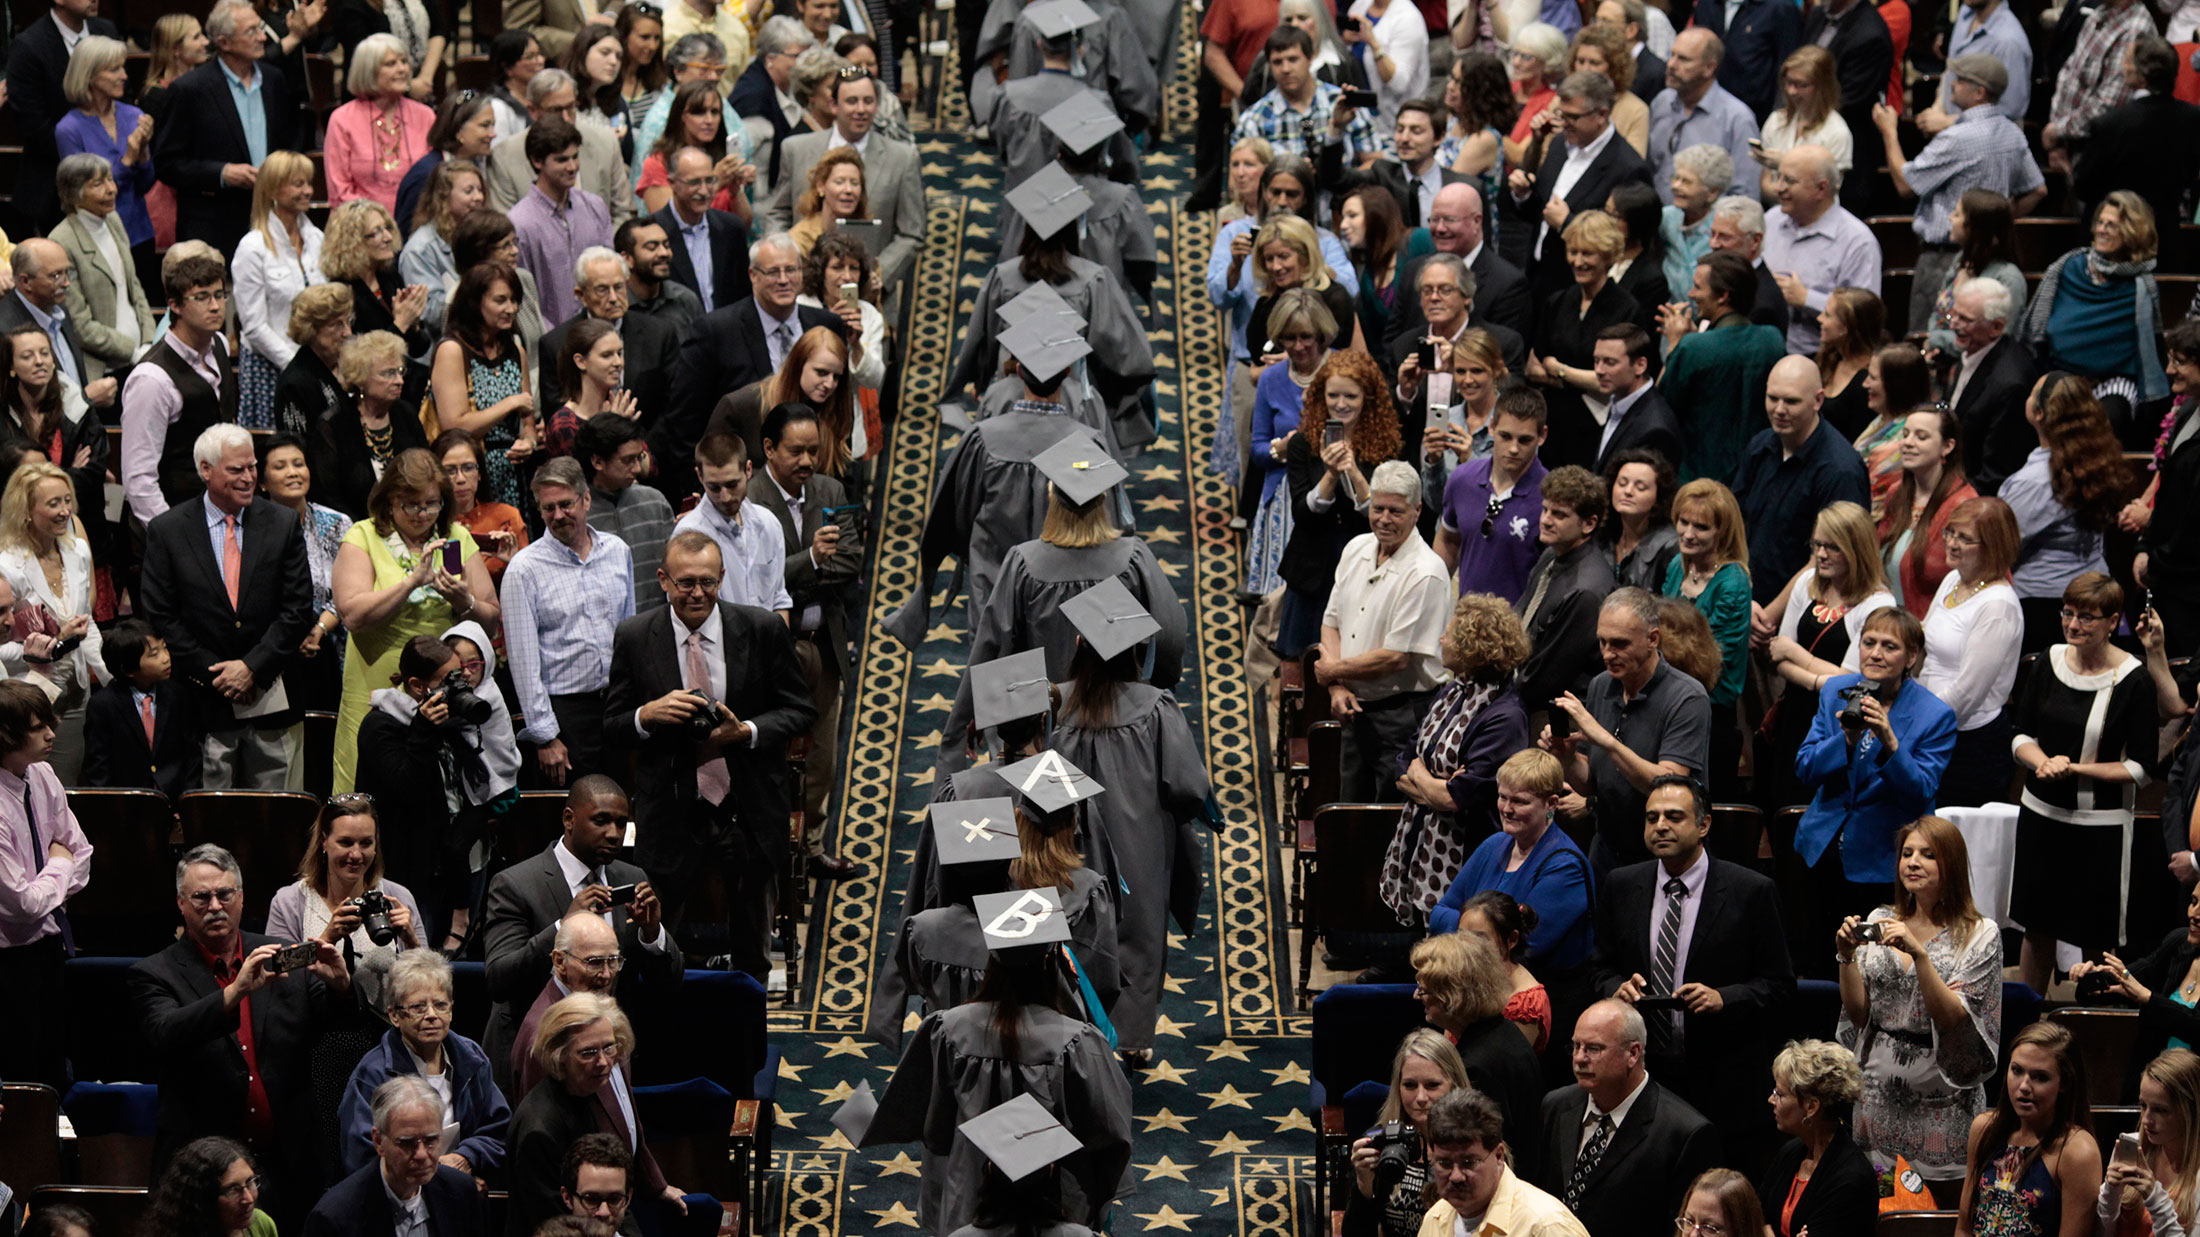 A commencement ceremony in Washington, DC .
